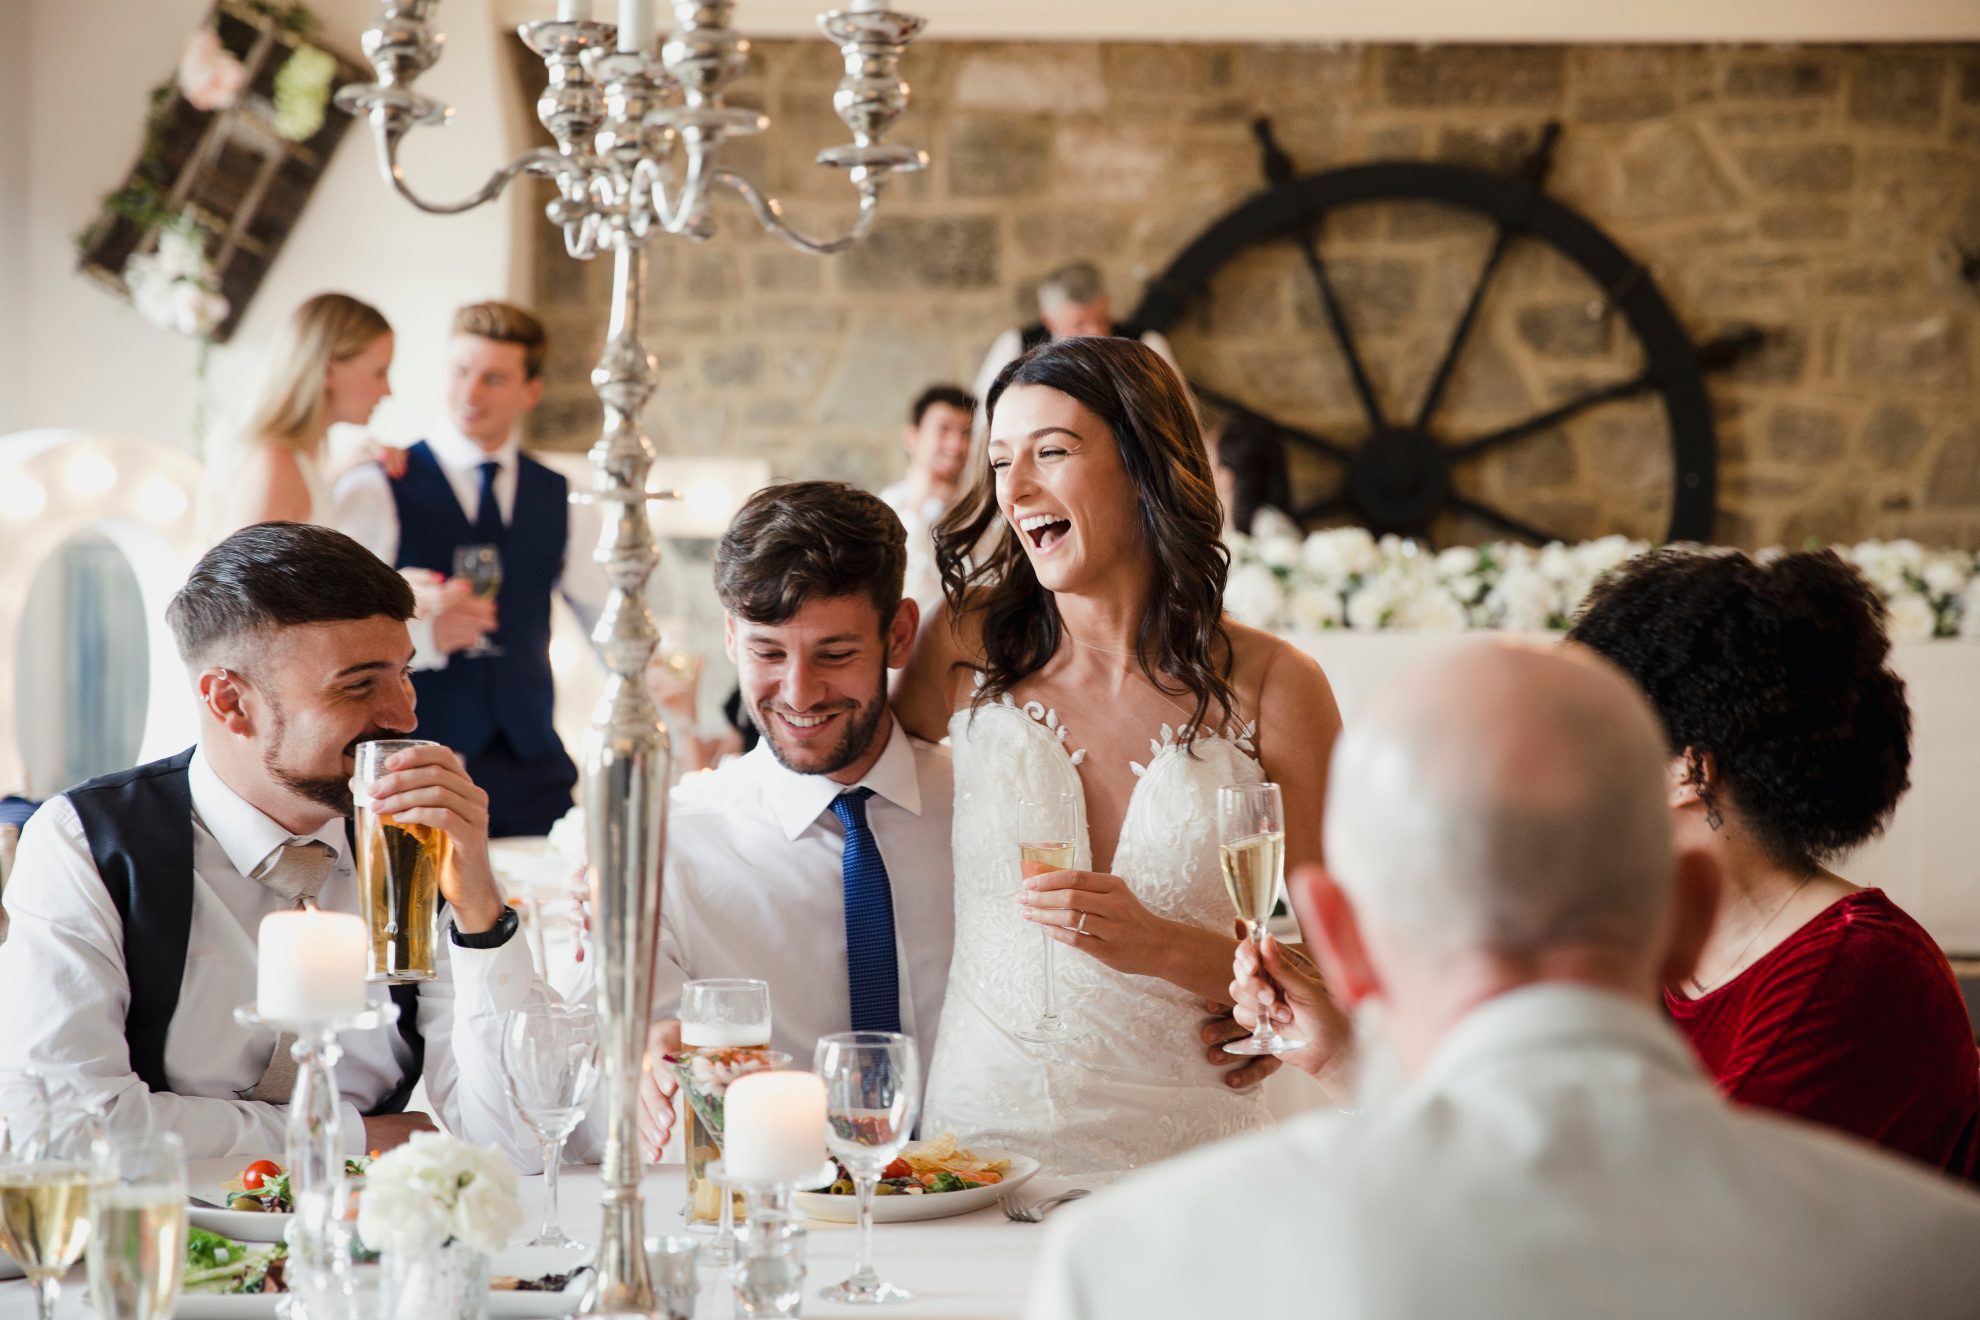 20 things a bride has to do - relax and enjoy the day